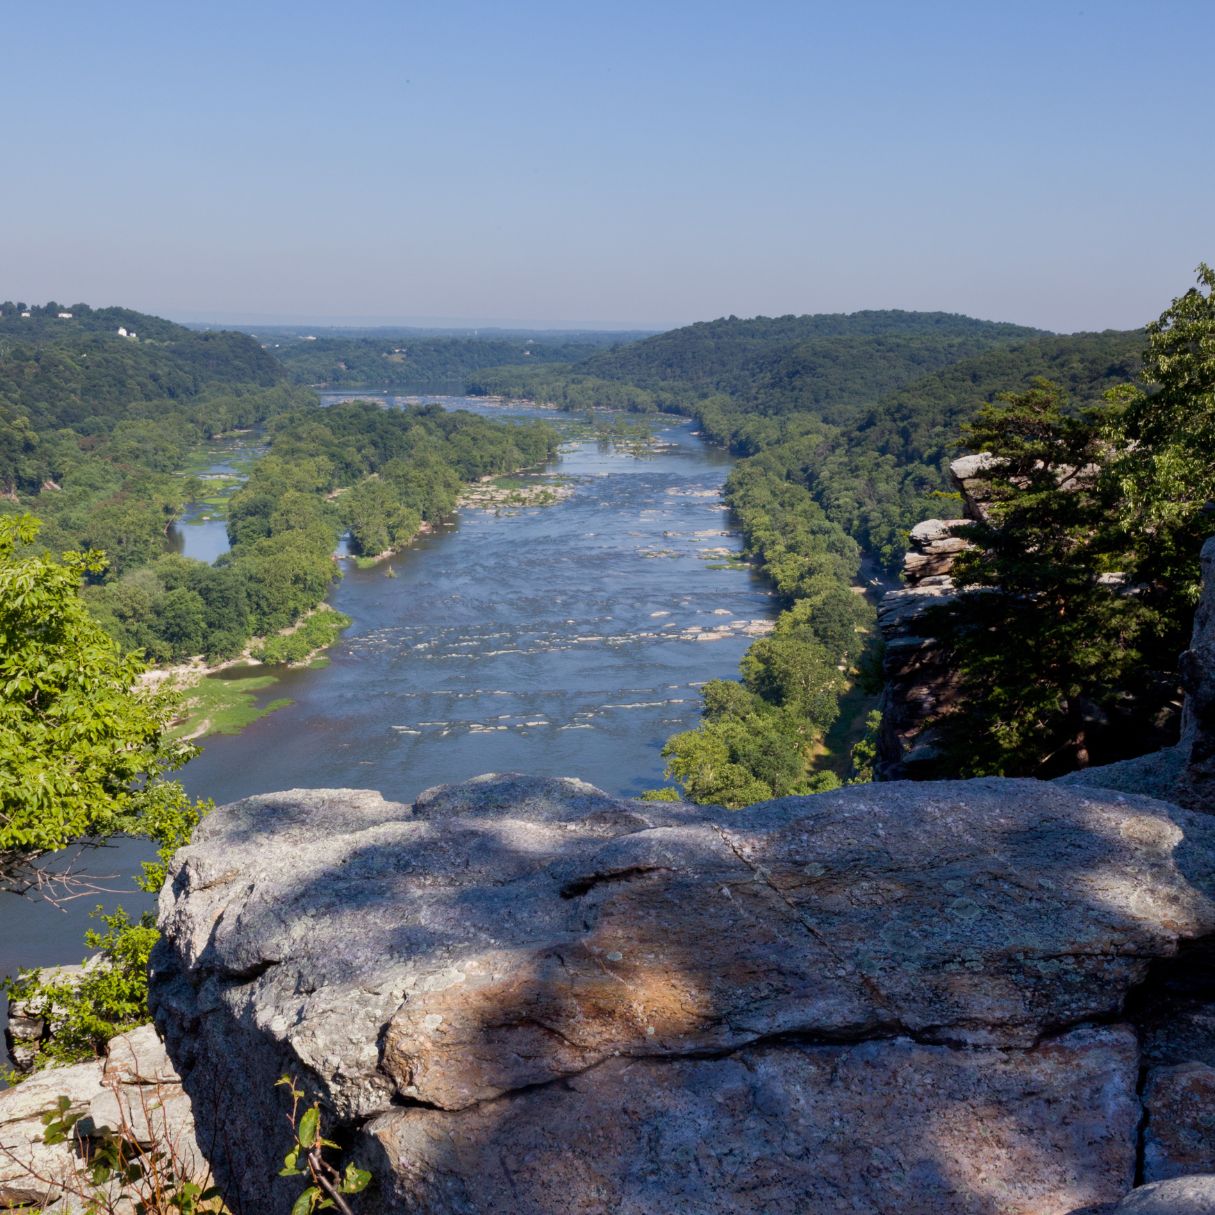 View over the Potomac River at Harpers Ferry